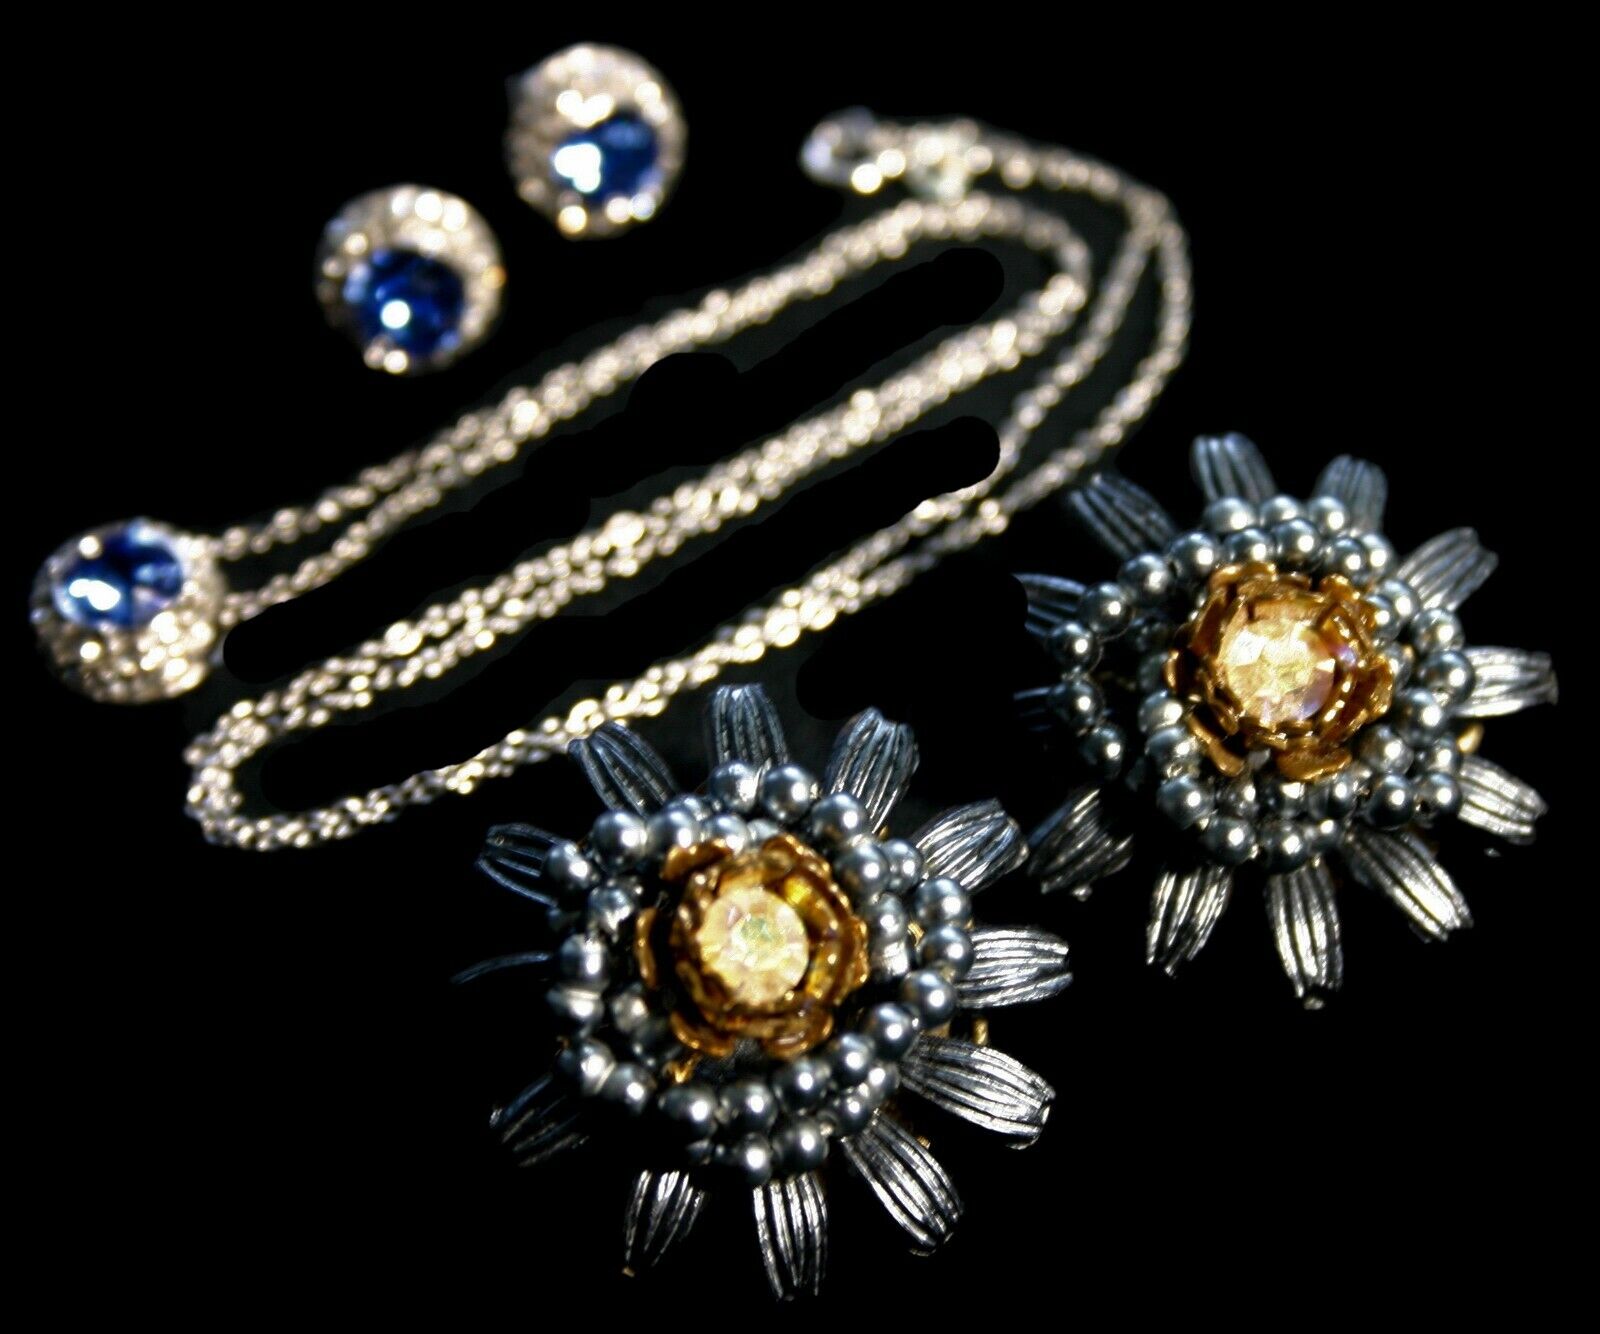 Vintage to Now Earrings Necklace/Pendant Clip/Pierced Blue Jewelry